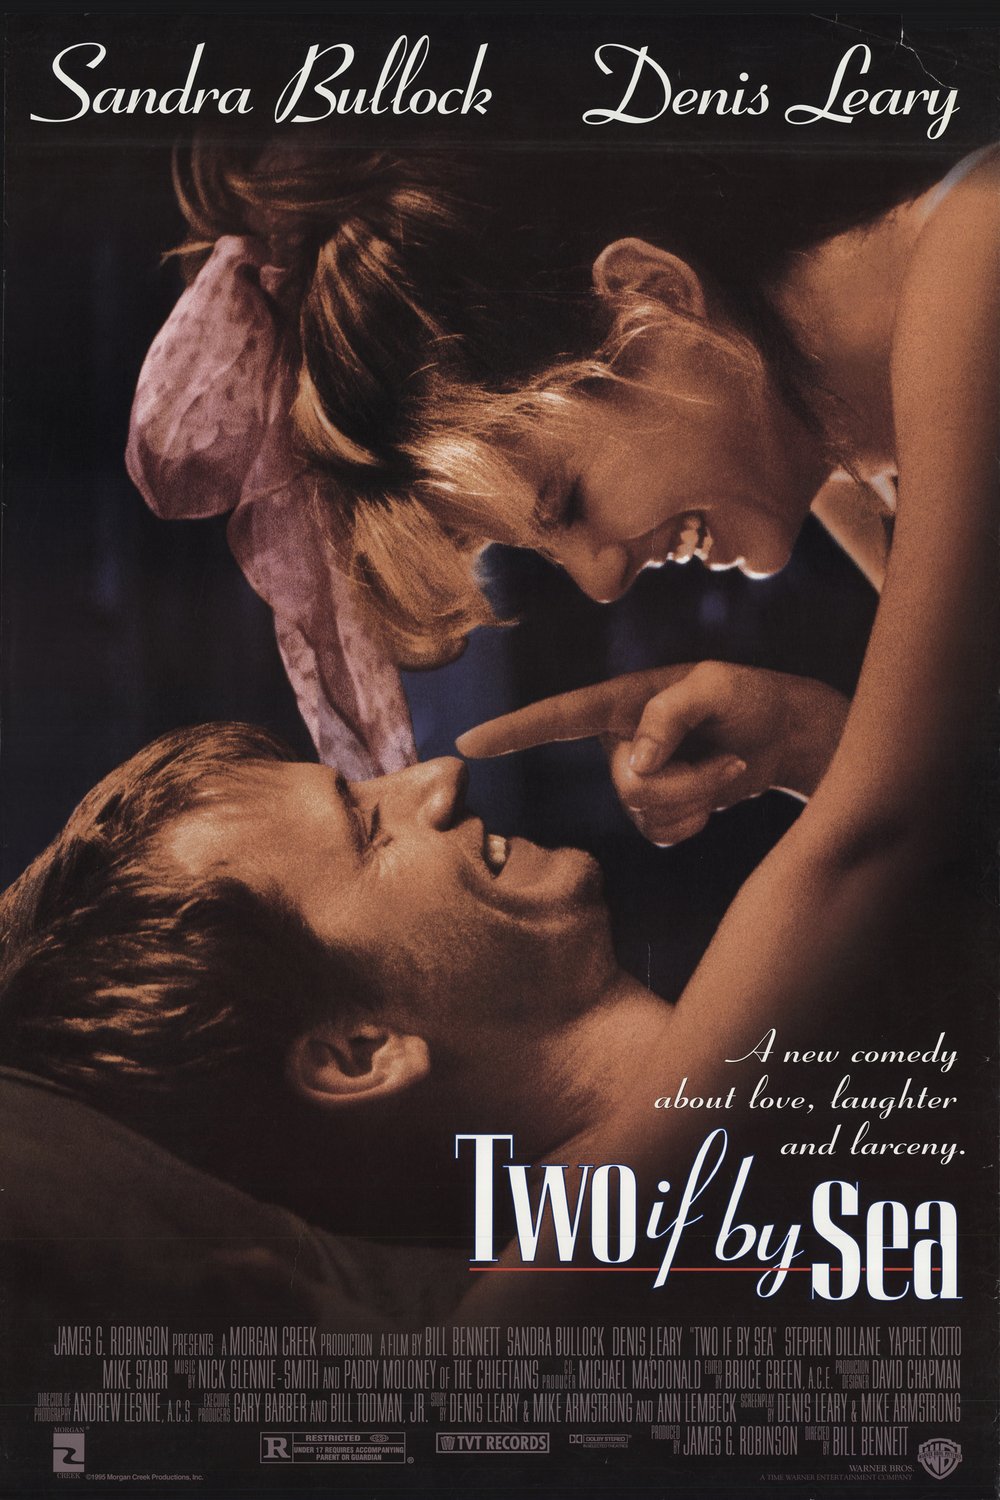 L'affiche du film Two If by Sea